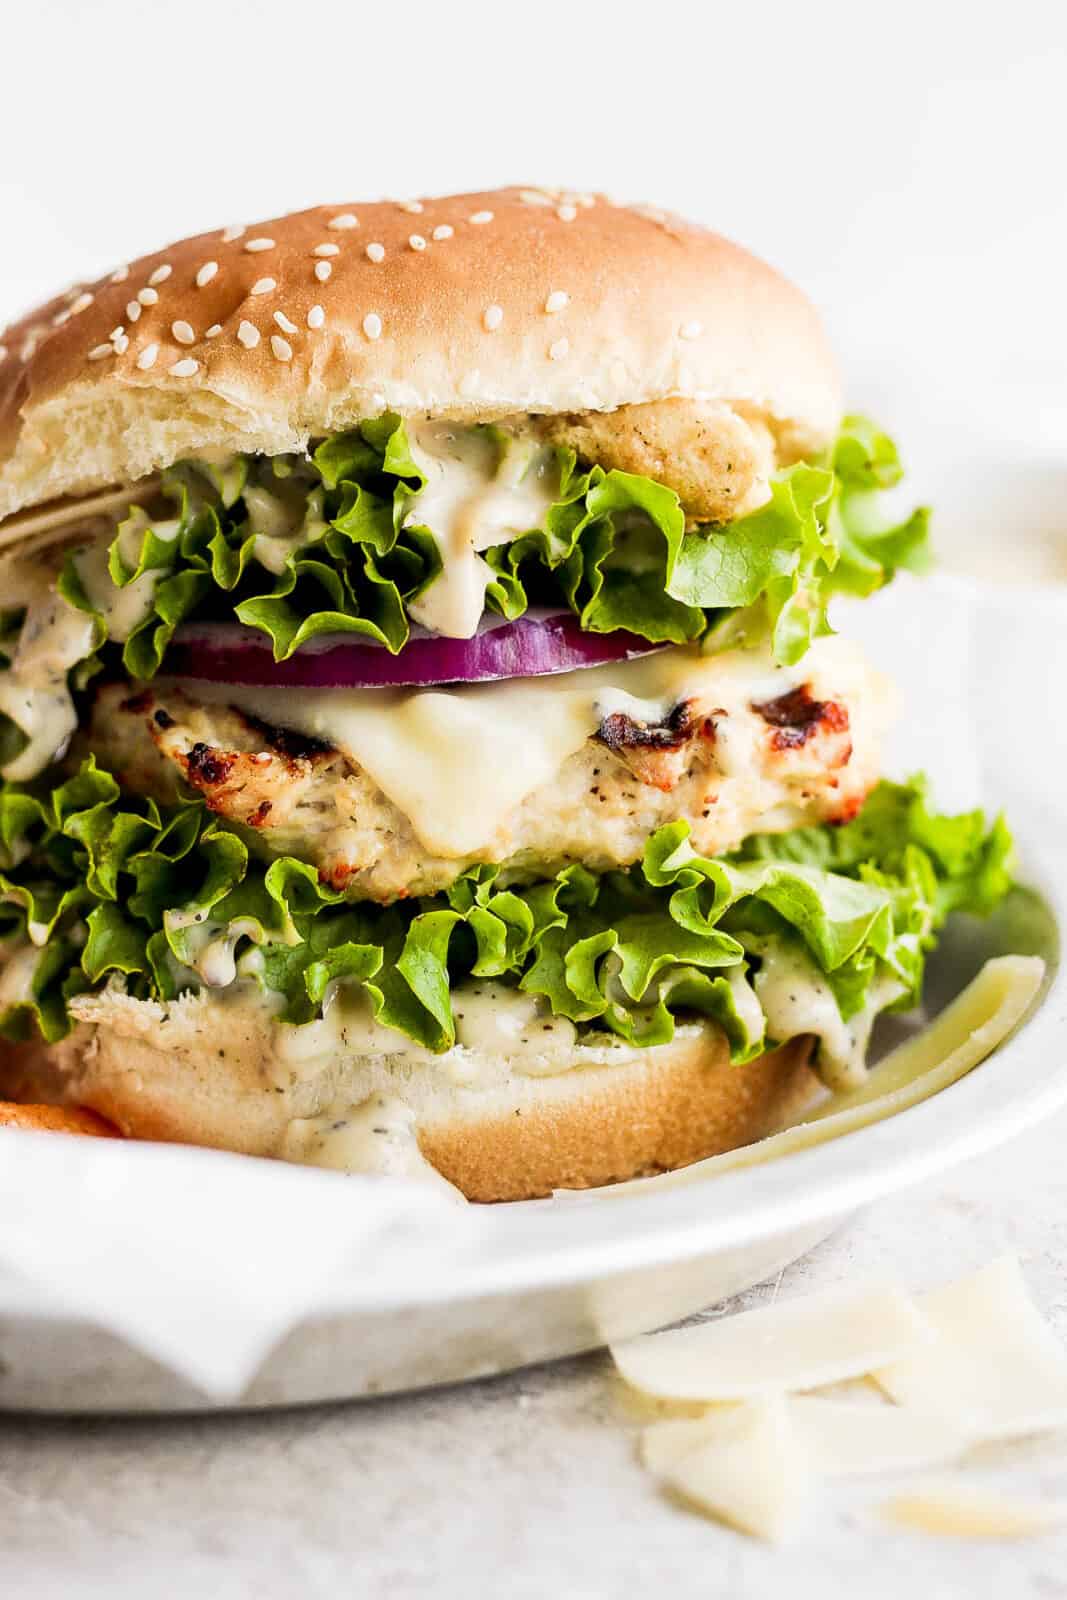 A chicken caesar burger on a bun with all the toppings.